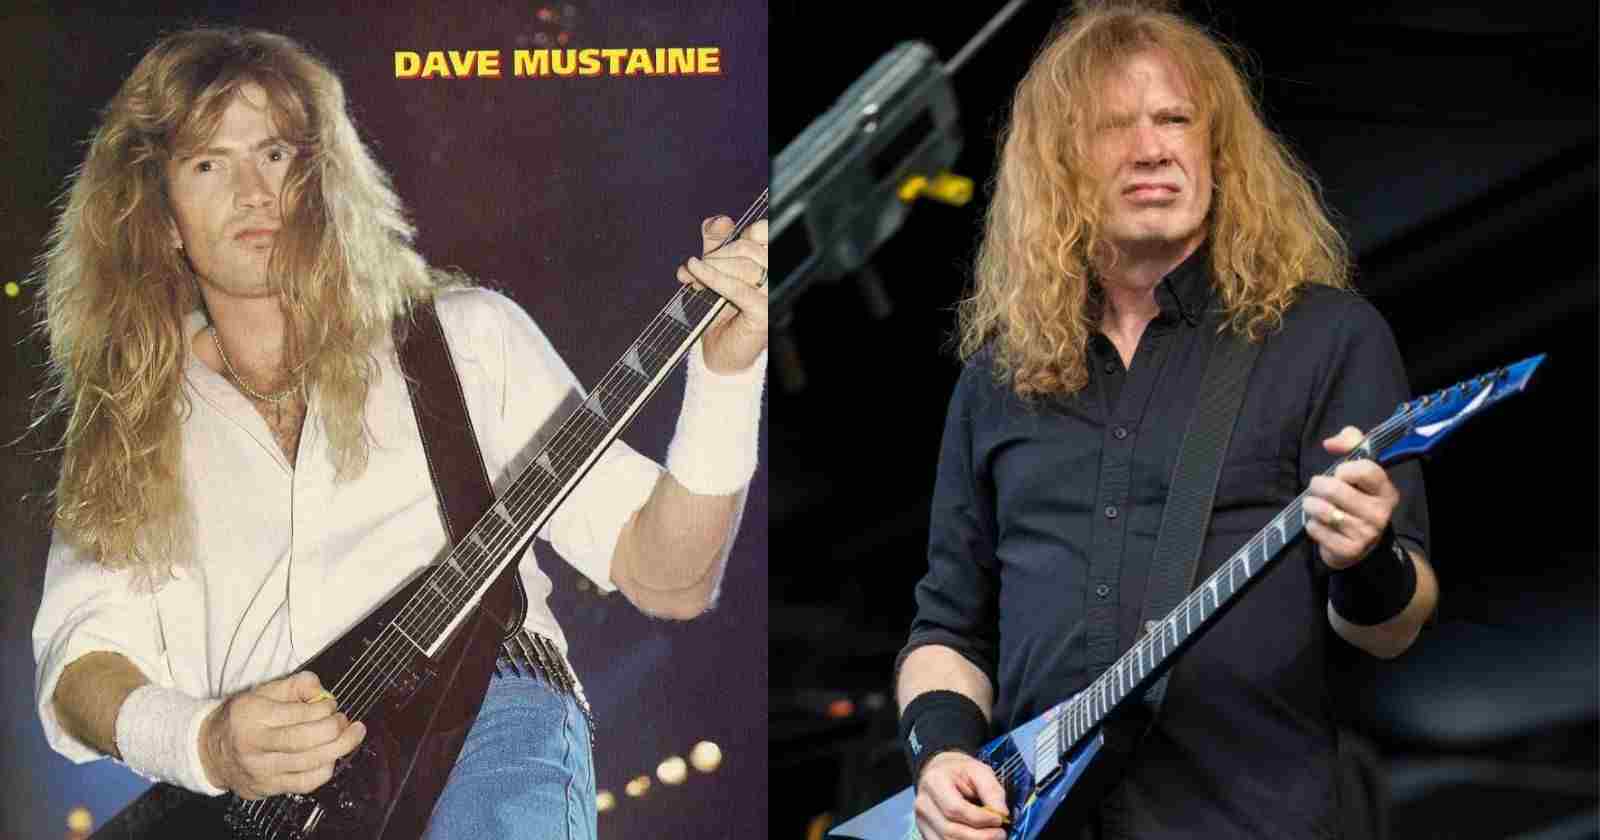 Dave Mustaine now and then